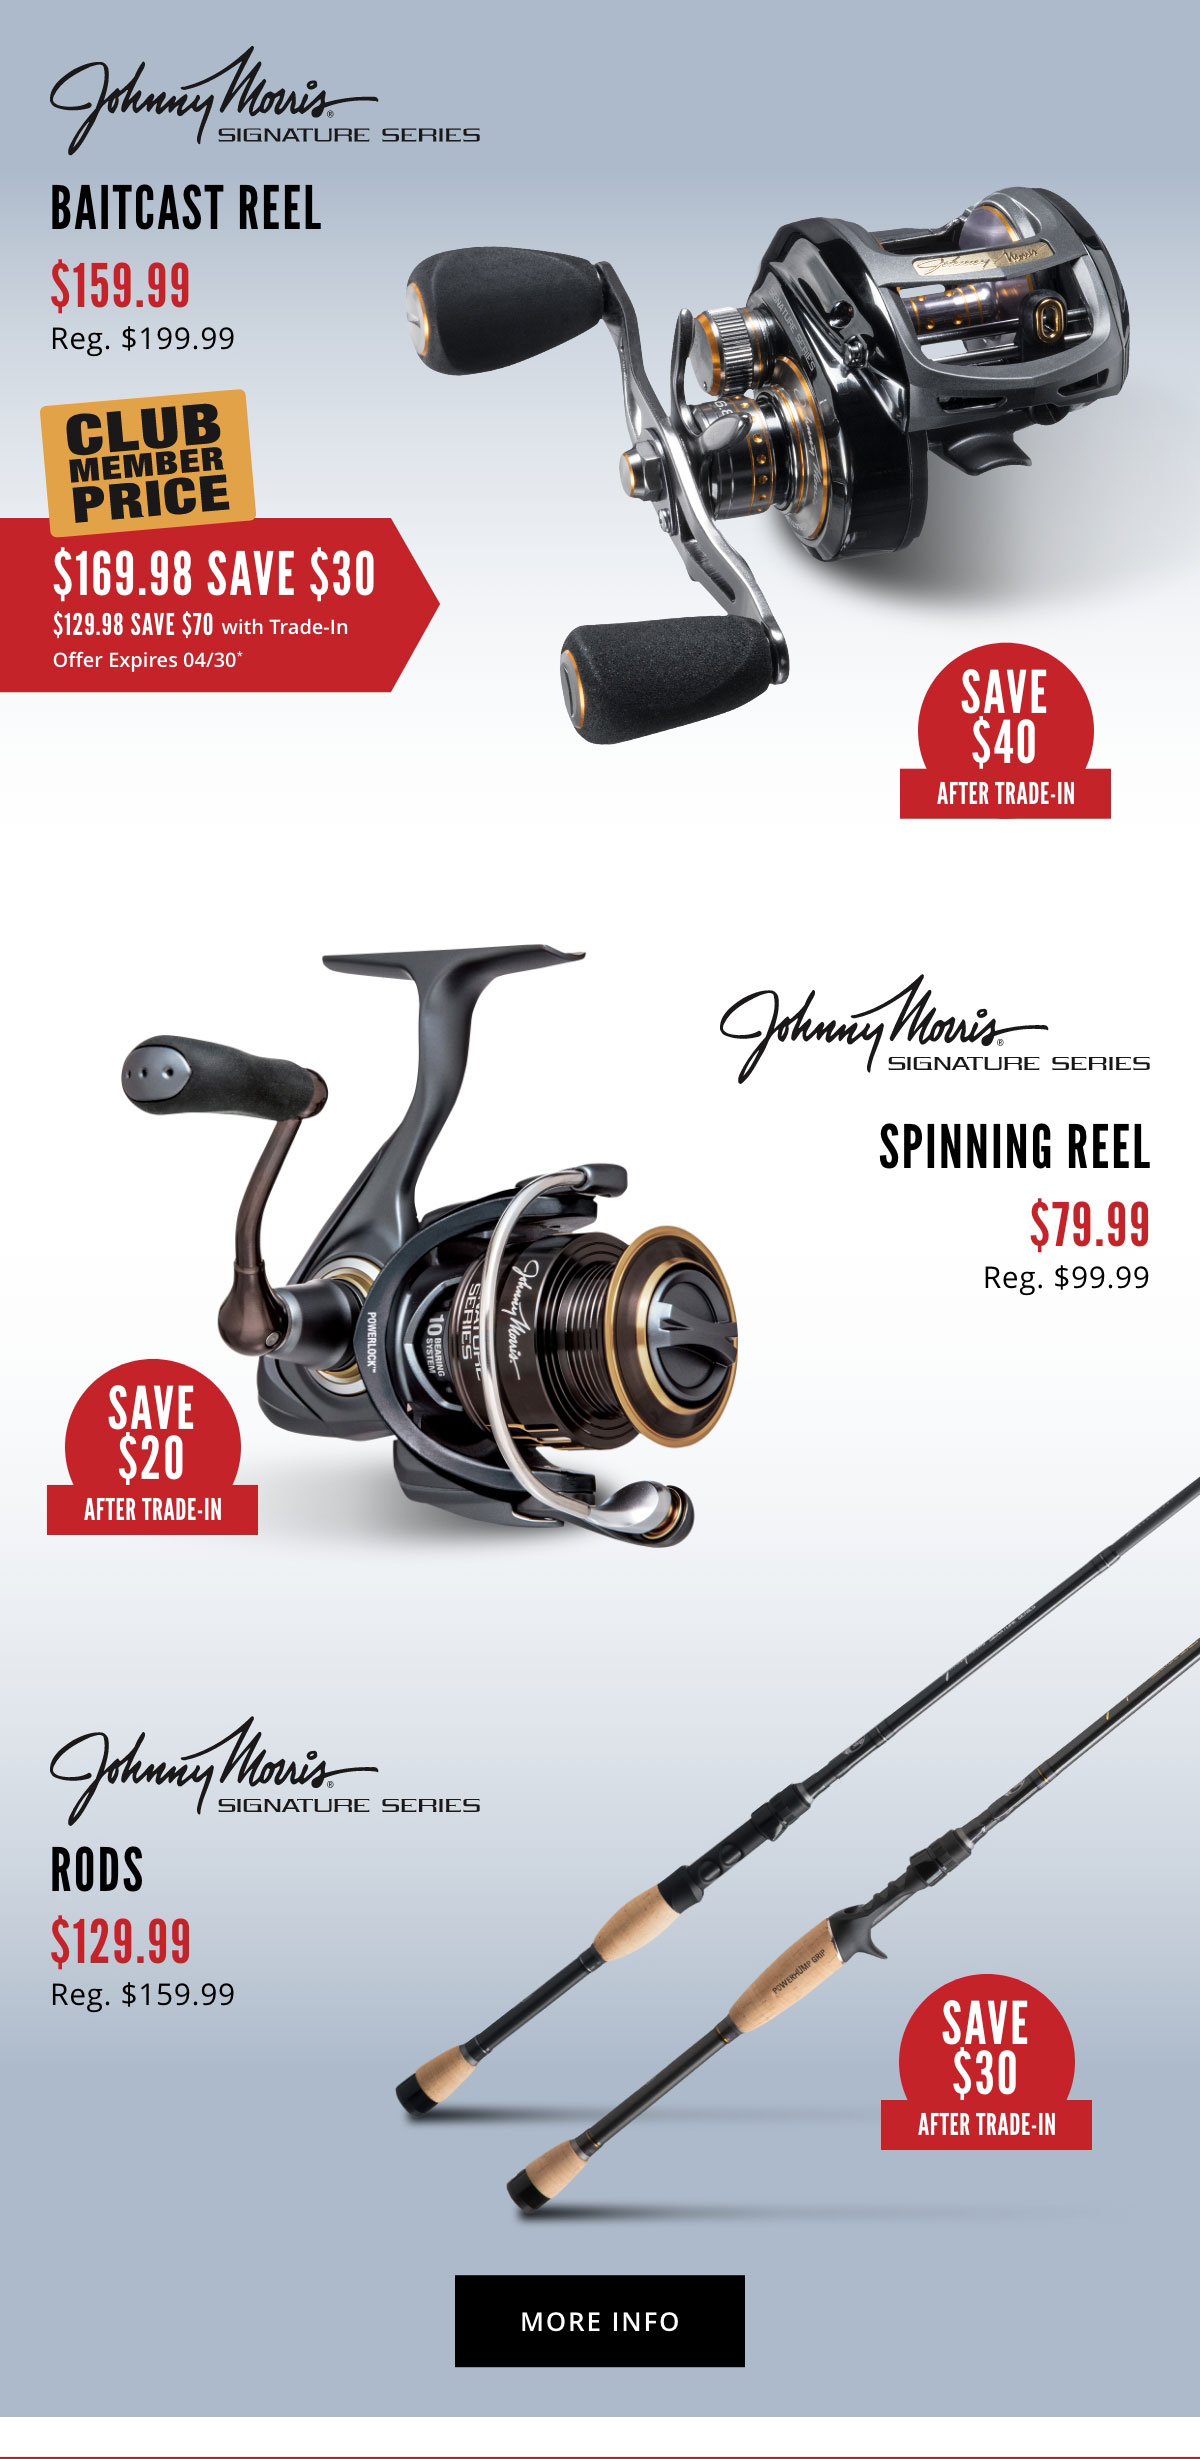 Bass Pro Shops: Rod & Reel Trade-In Going On Now!